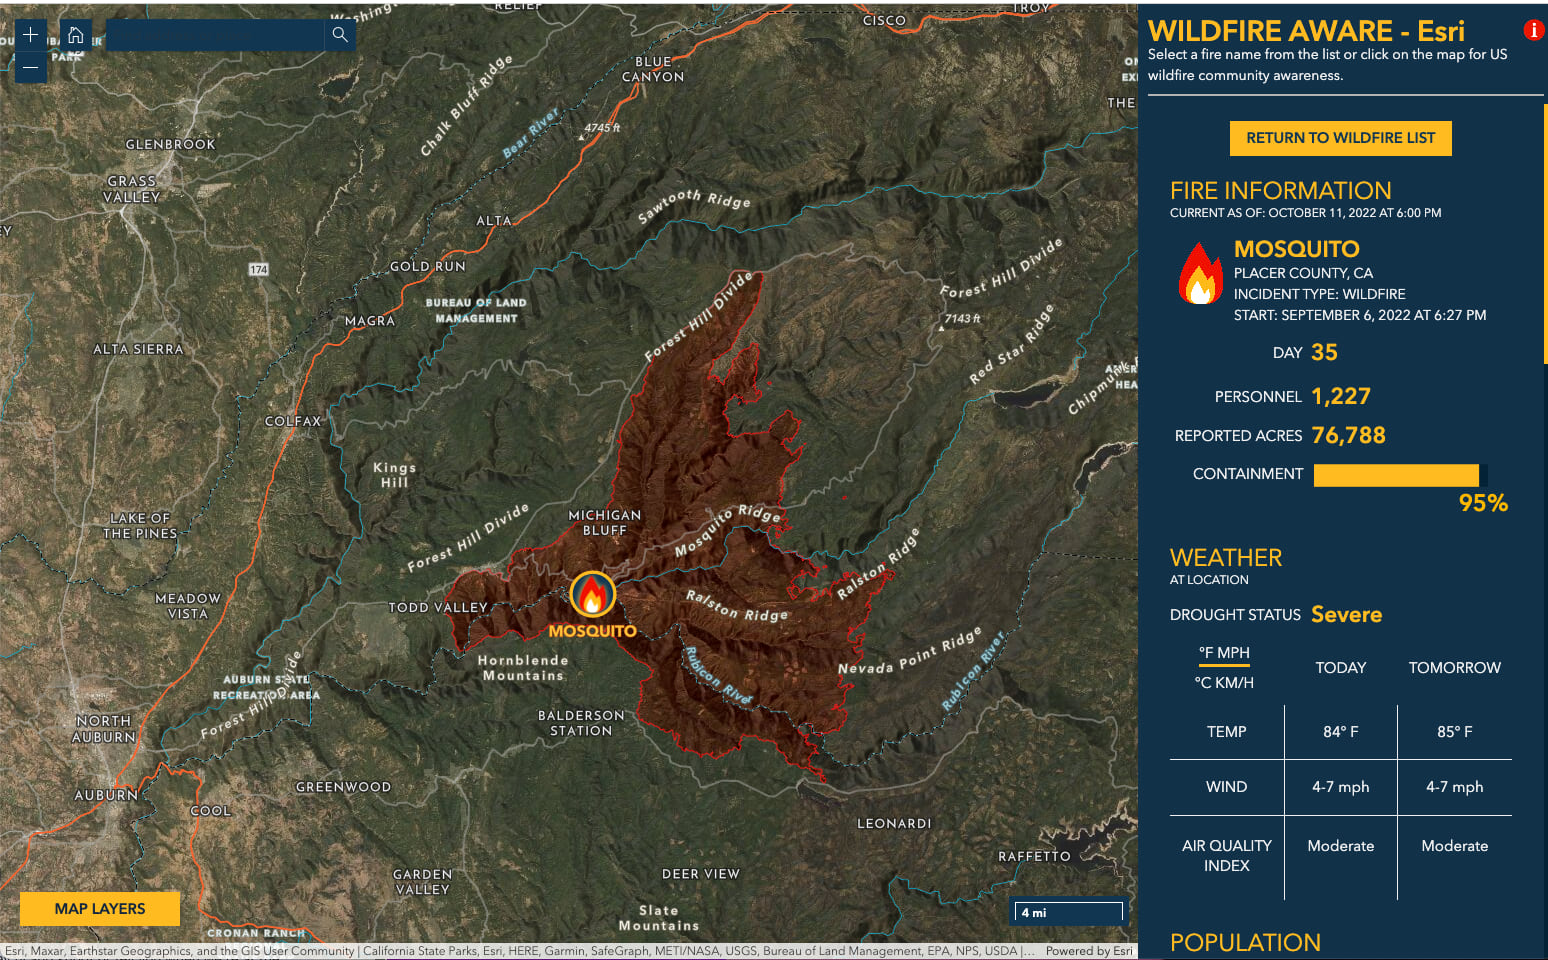 2022 Mosquito Fire as seen in the Wildfire Aware app October 12, 2022